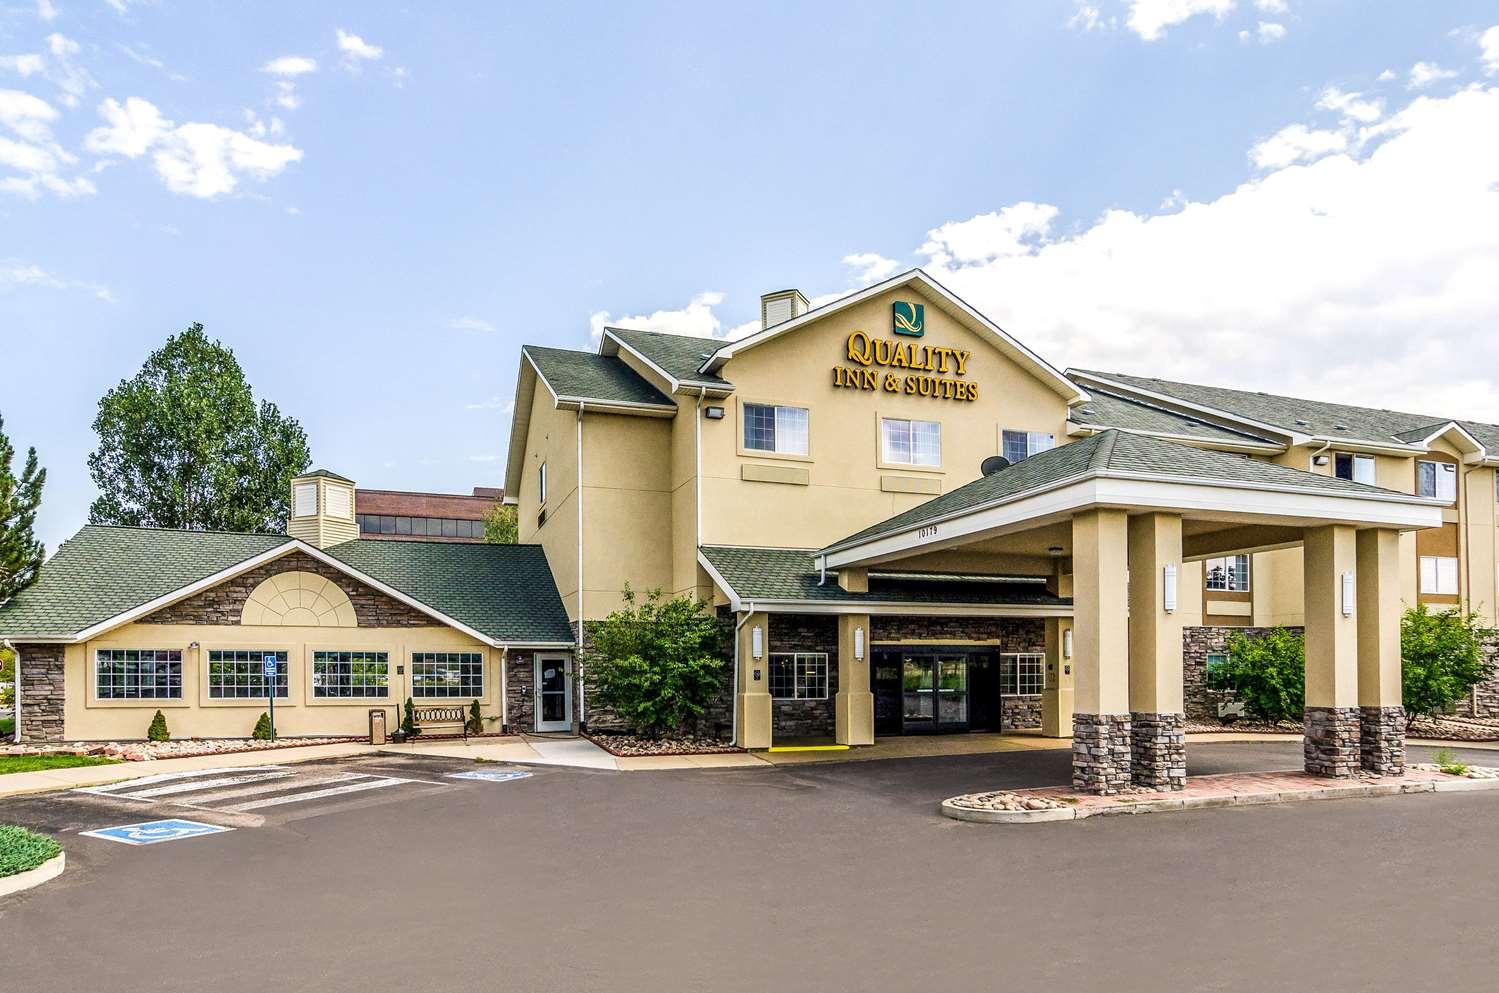 Quality Inn and Suites Westminster - Broomfield in Westminster, CO